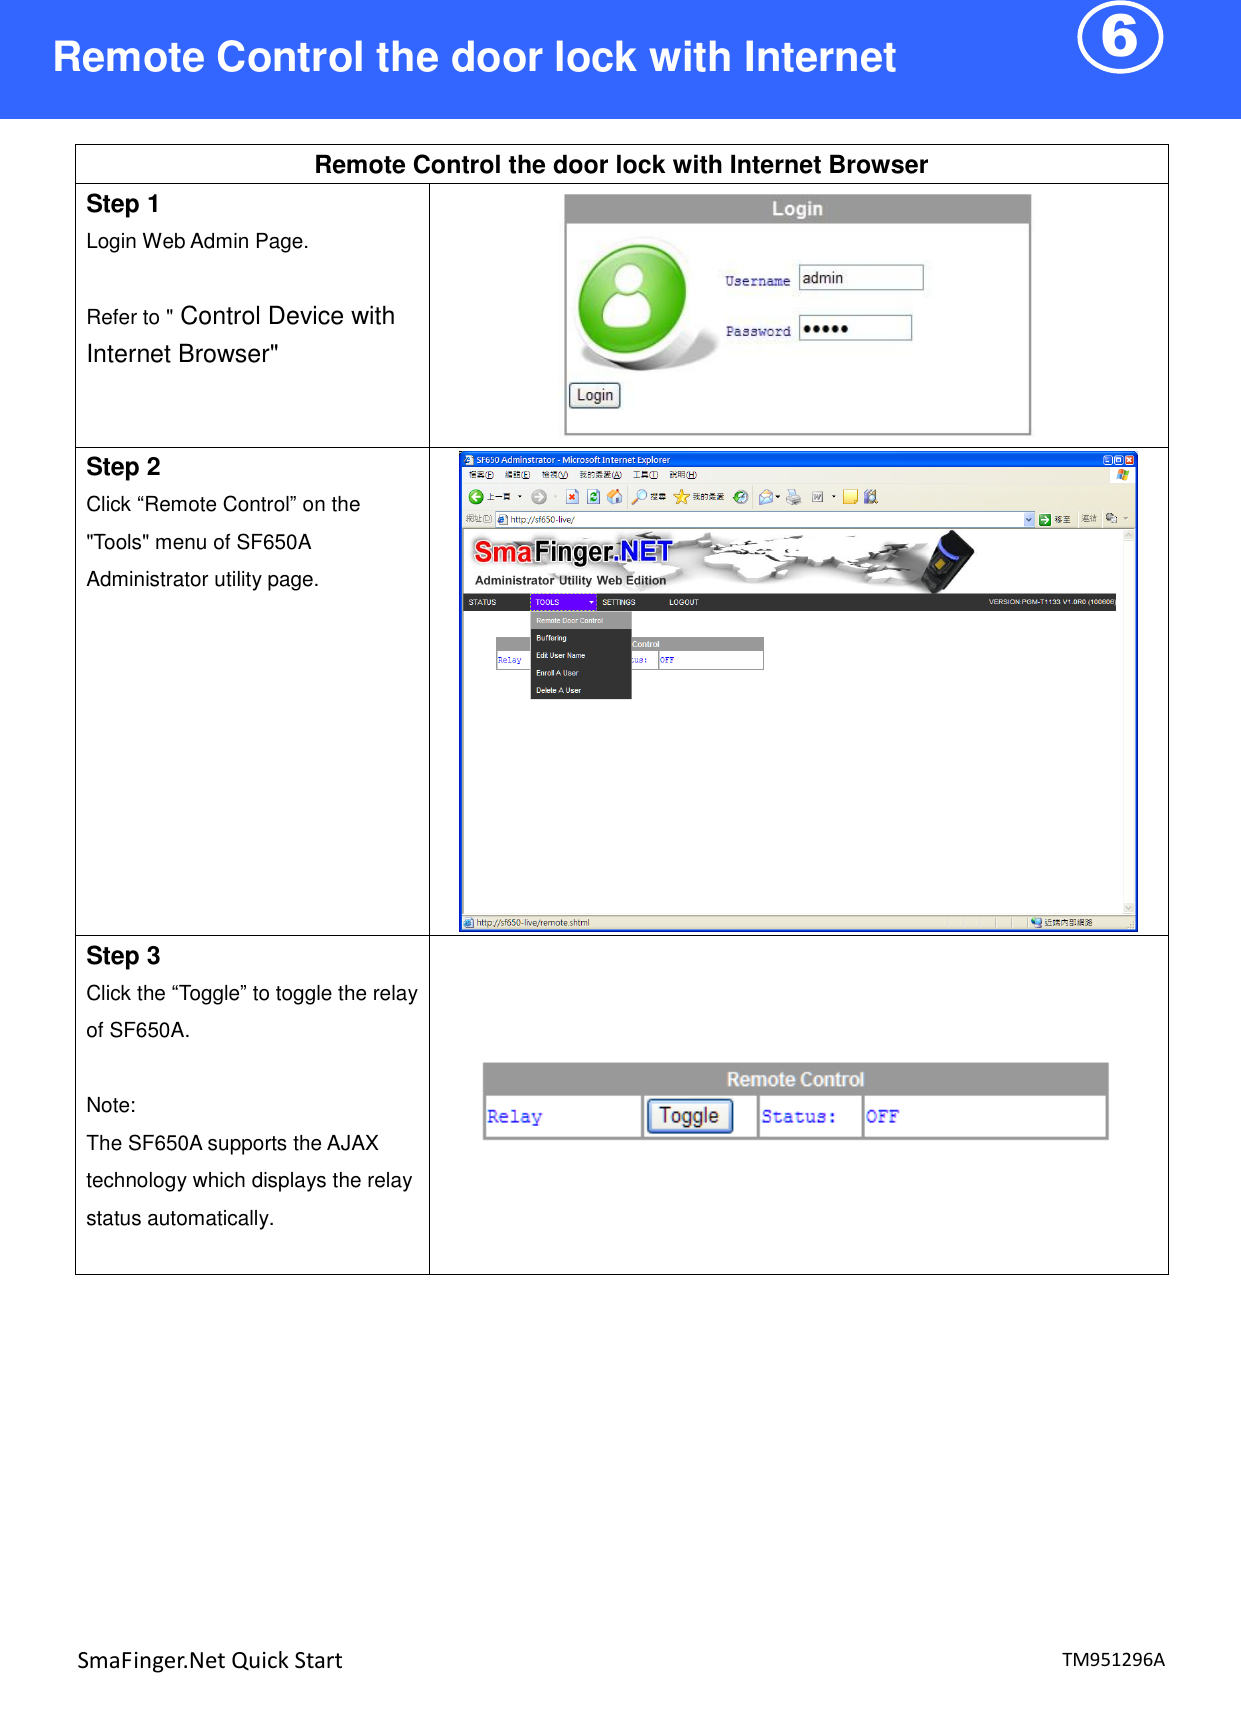 6  TM951296A SmaFinger.Net Quick Start  Remote Control the door lock with Internet Browser Step 1 Login Web Admin Page.  Refer to &quot; Control Device with Internet Browser&quot;  Step 2 Click “Remote Control” on the &quot;Tools&quot; menu of SF650A Administrator utility page.   Step 3 Click the “Toggle” to toggle the relay of SF650A.  Note: The SF650A supports the AJAX technology which displays the relay status automatically.    Remote Control the door lock with Internet Browser 